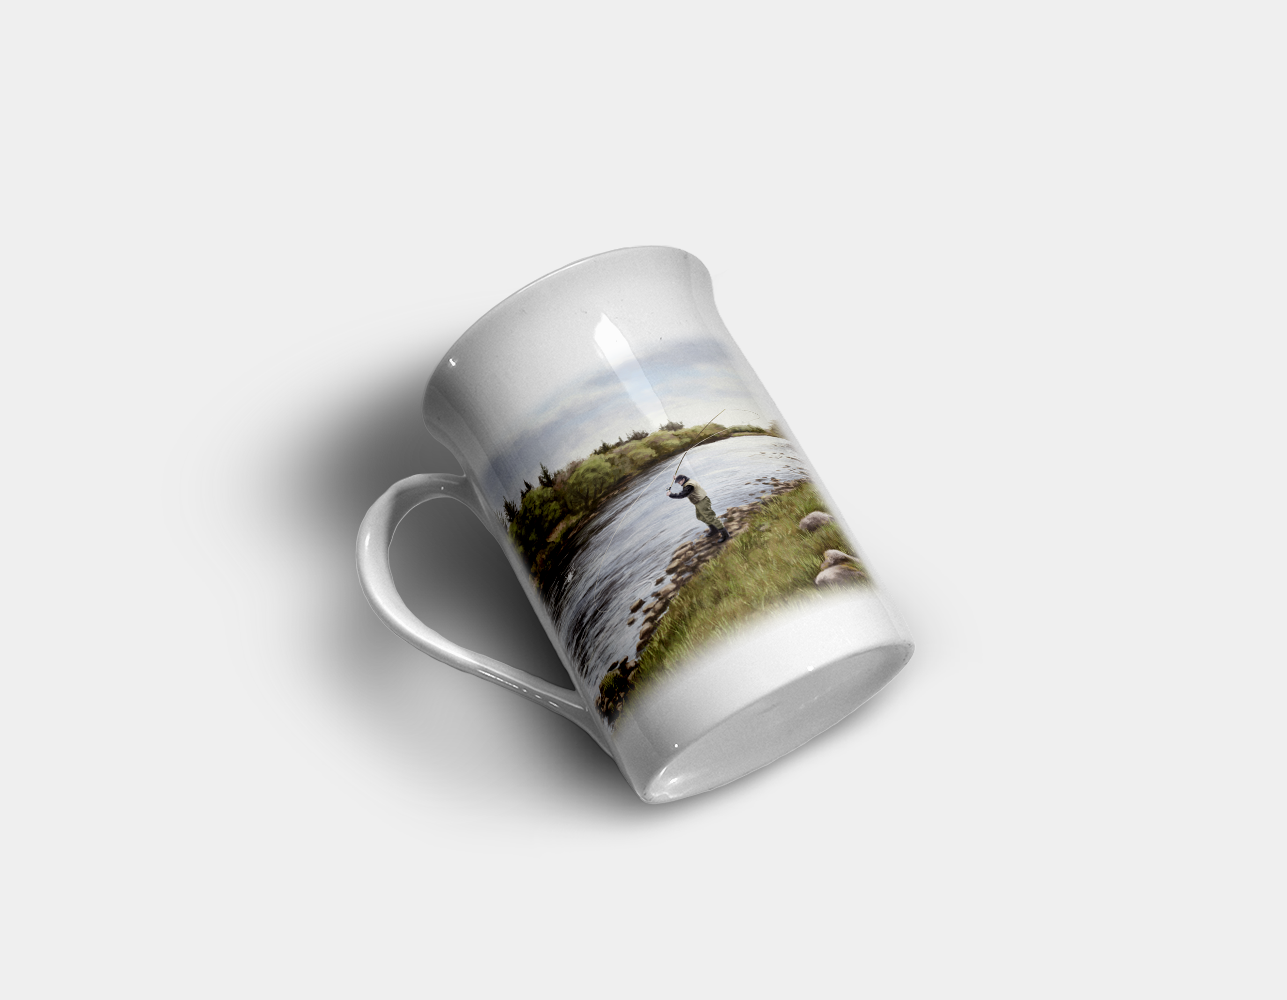 https://www.countryimages.co.uk/wp-content/uploads/2019/06/Country-Images-Personalised-Custom-Bone-China-Mug-Highland-Collection-Fly-Fishing-Angling-Angler-Fisherman-Fish-Gift-Gifts-Idea-Ideas-11.png